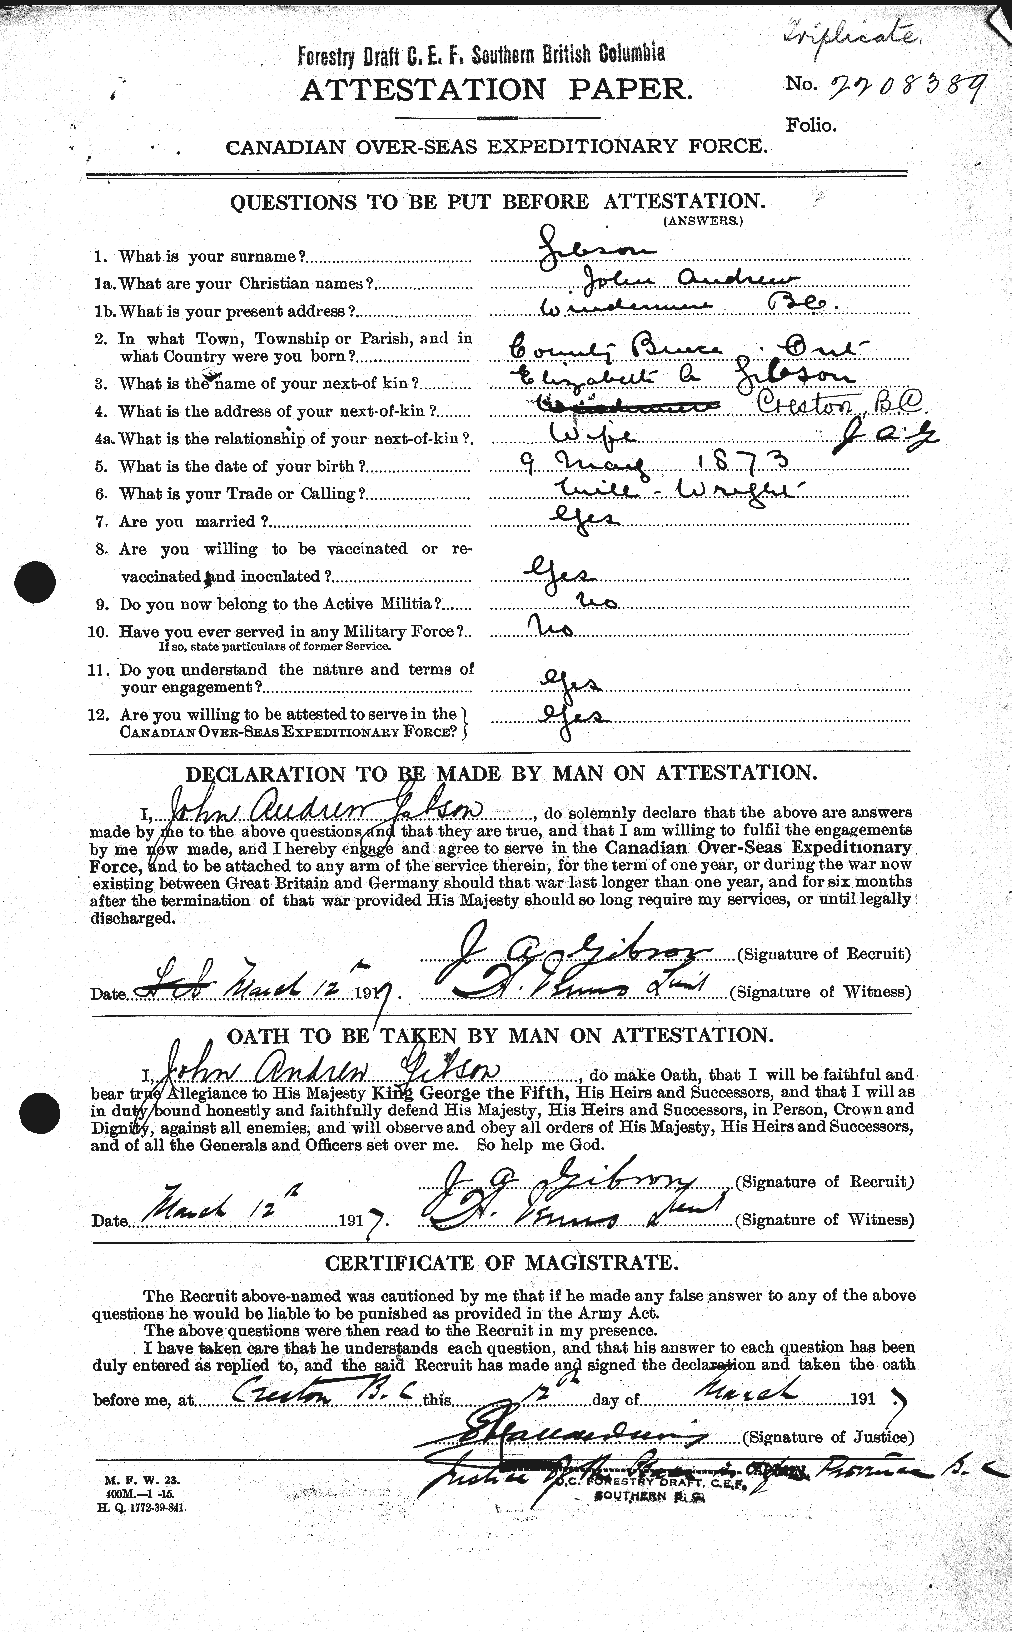 Personnel Records of the First World War - CEF 348622a